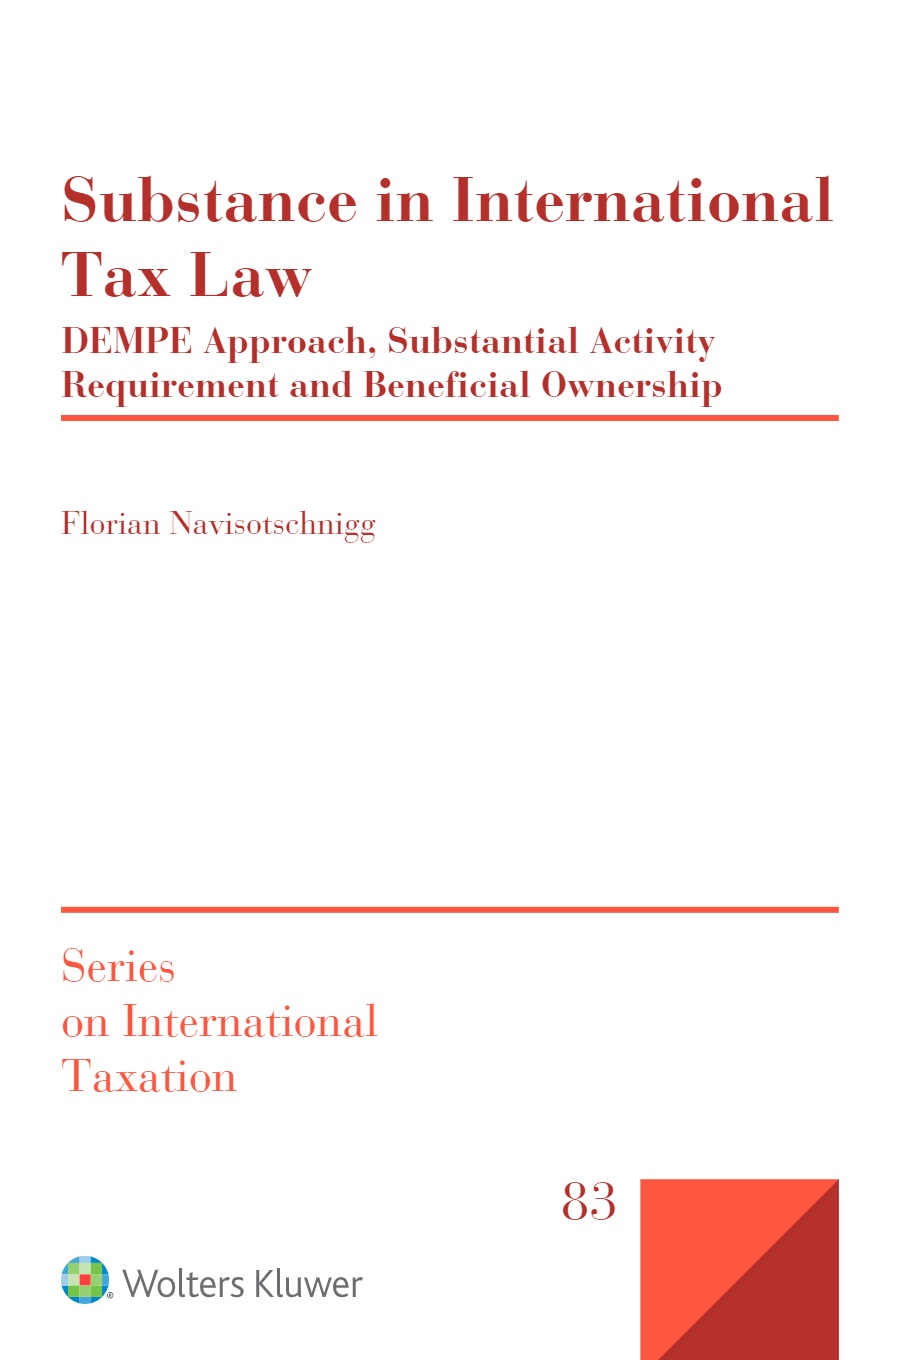 Substance in International Tax Law: DEMPE Approach, Substantial Activity Requirement and Beneficial Ownership